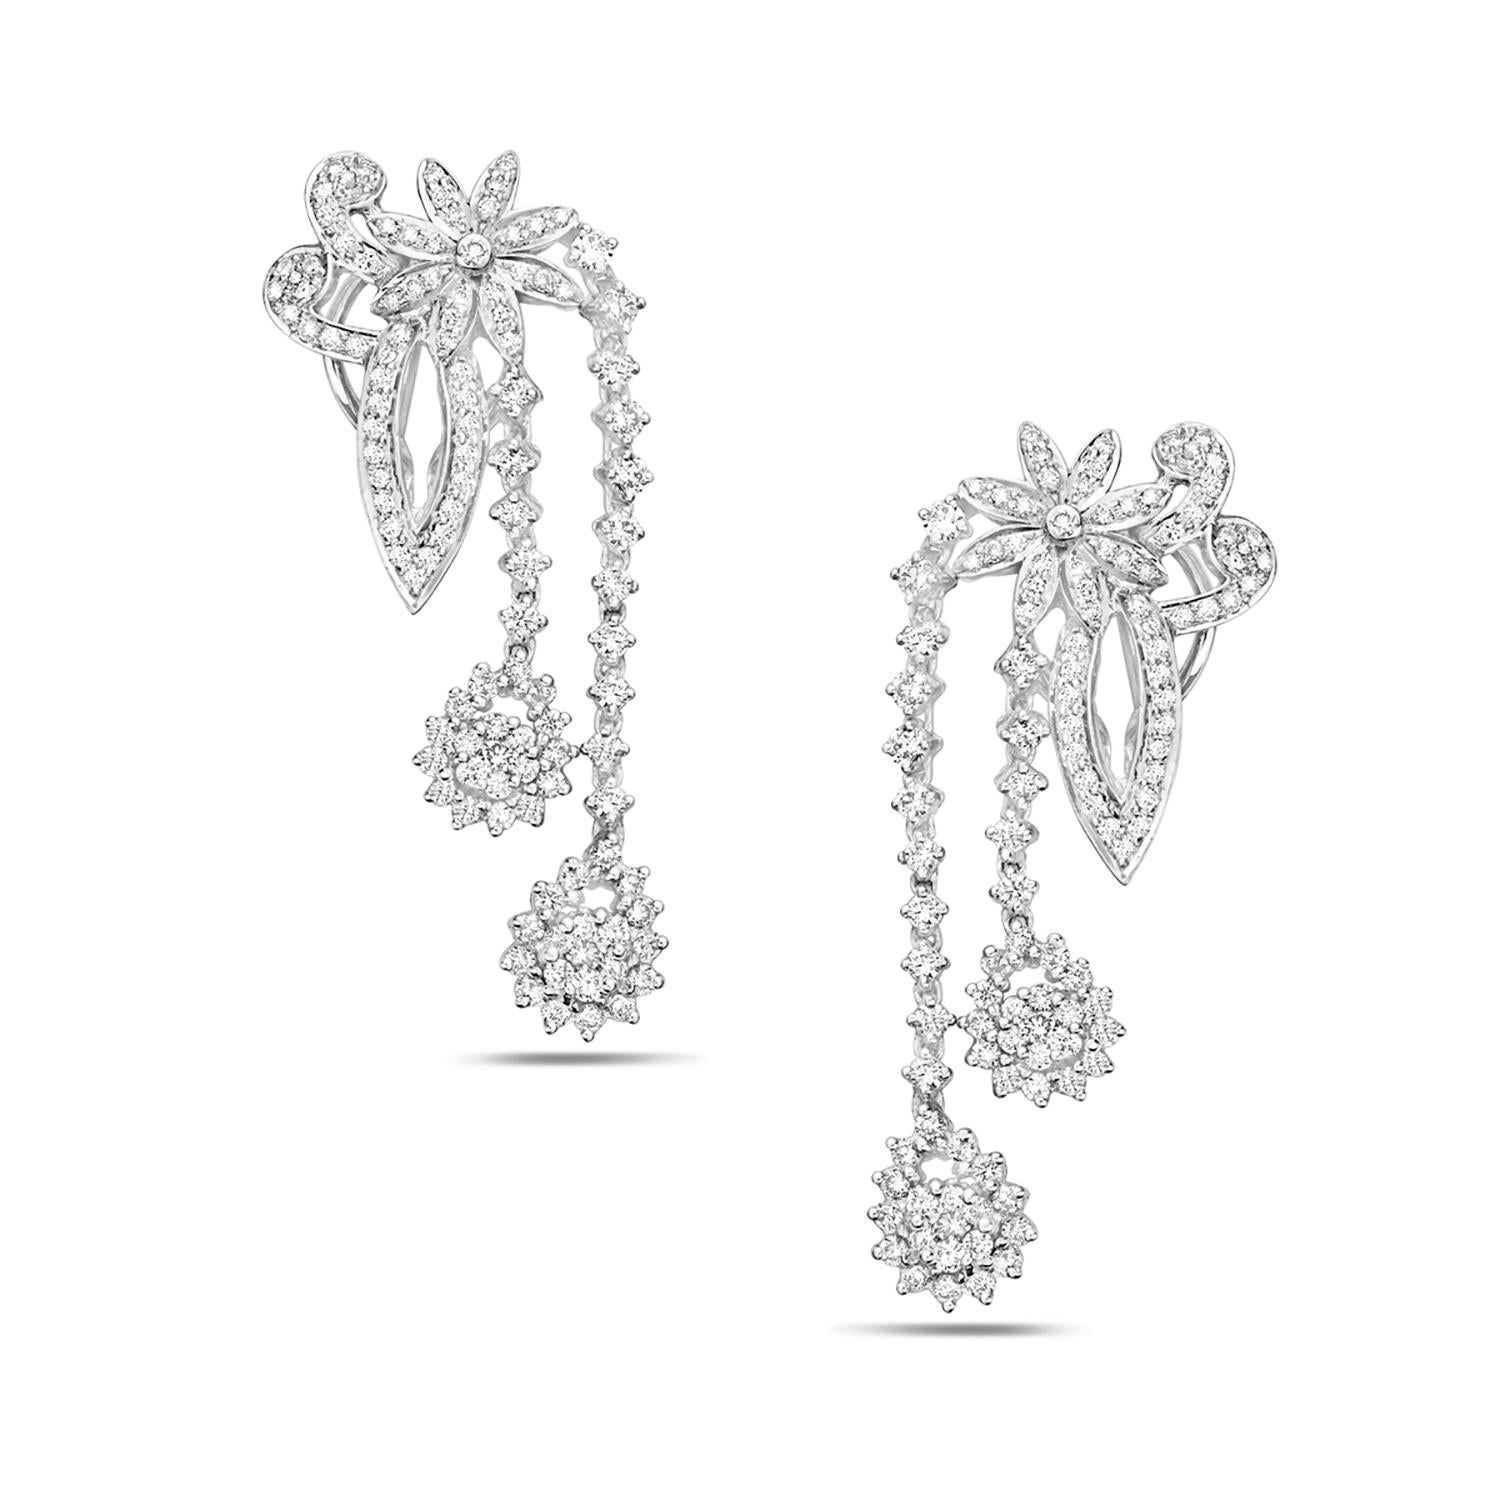 Floral Shaped Earrings with VS Diamonds Made in 18k White Gold In New Condition For Sale In New York, NY